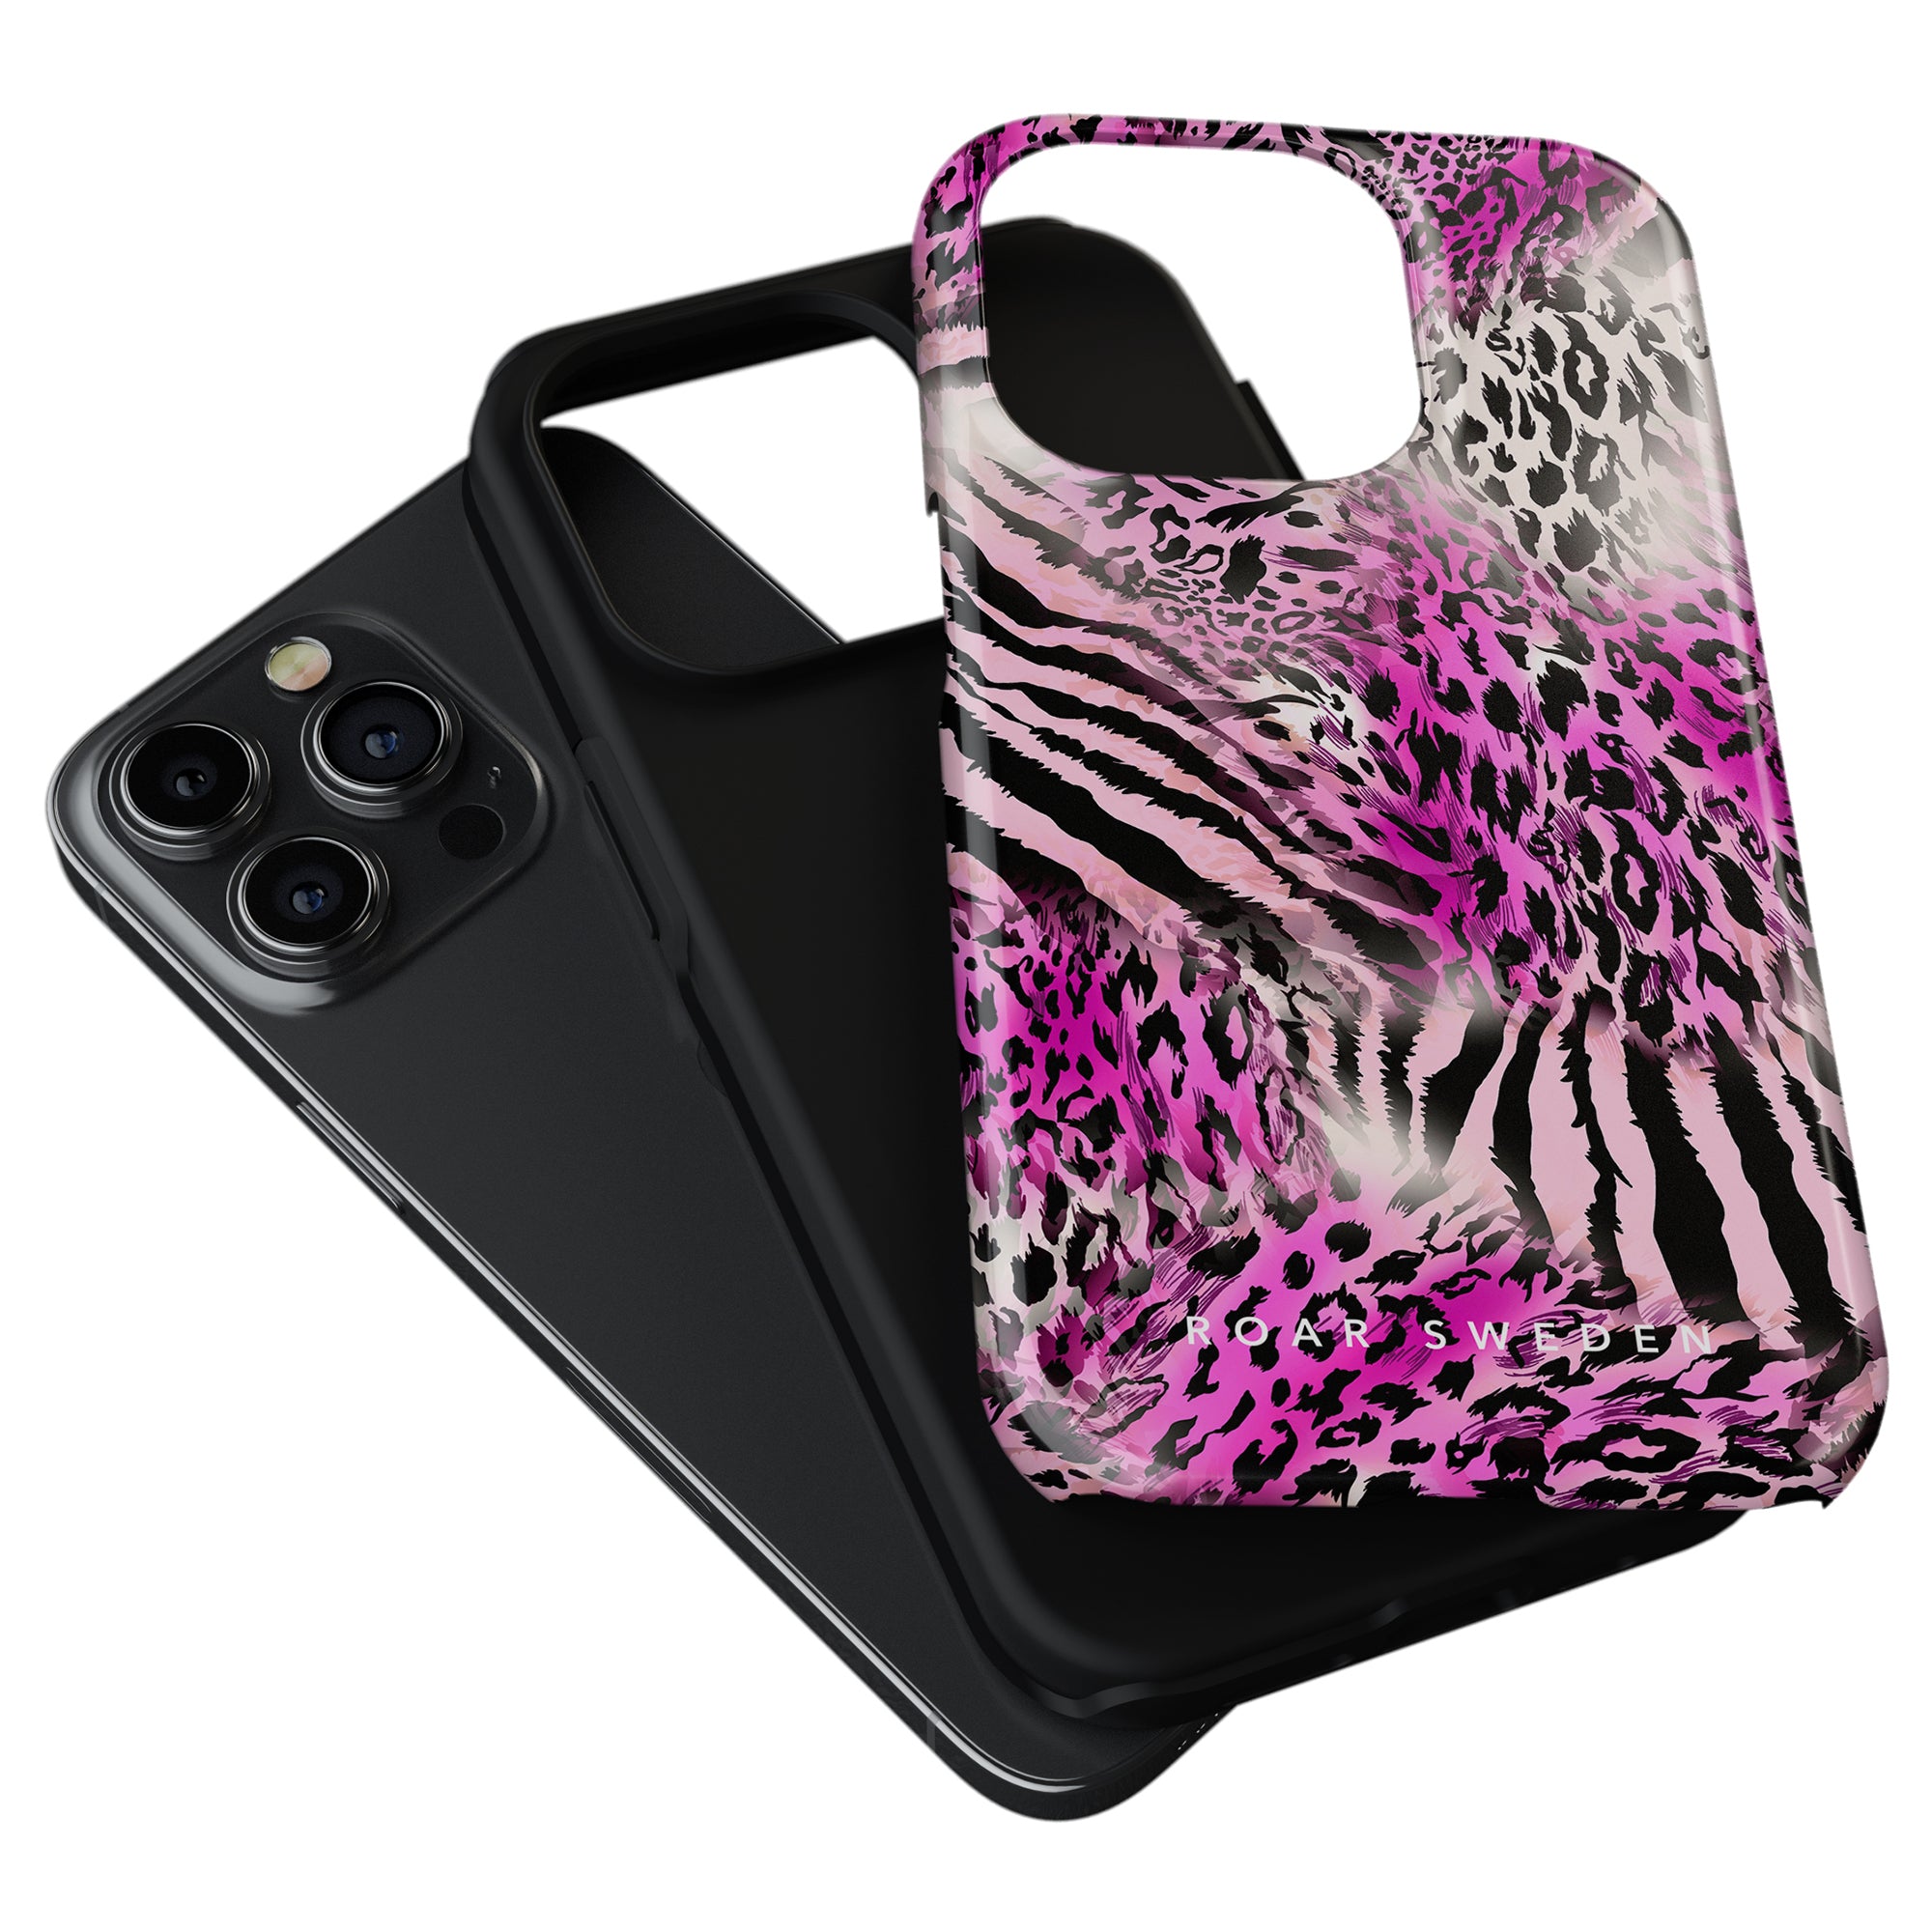 A Savannah Fuchsia - Tough Case with a pink and purple zebra print design for the iPhone 11.